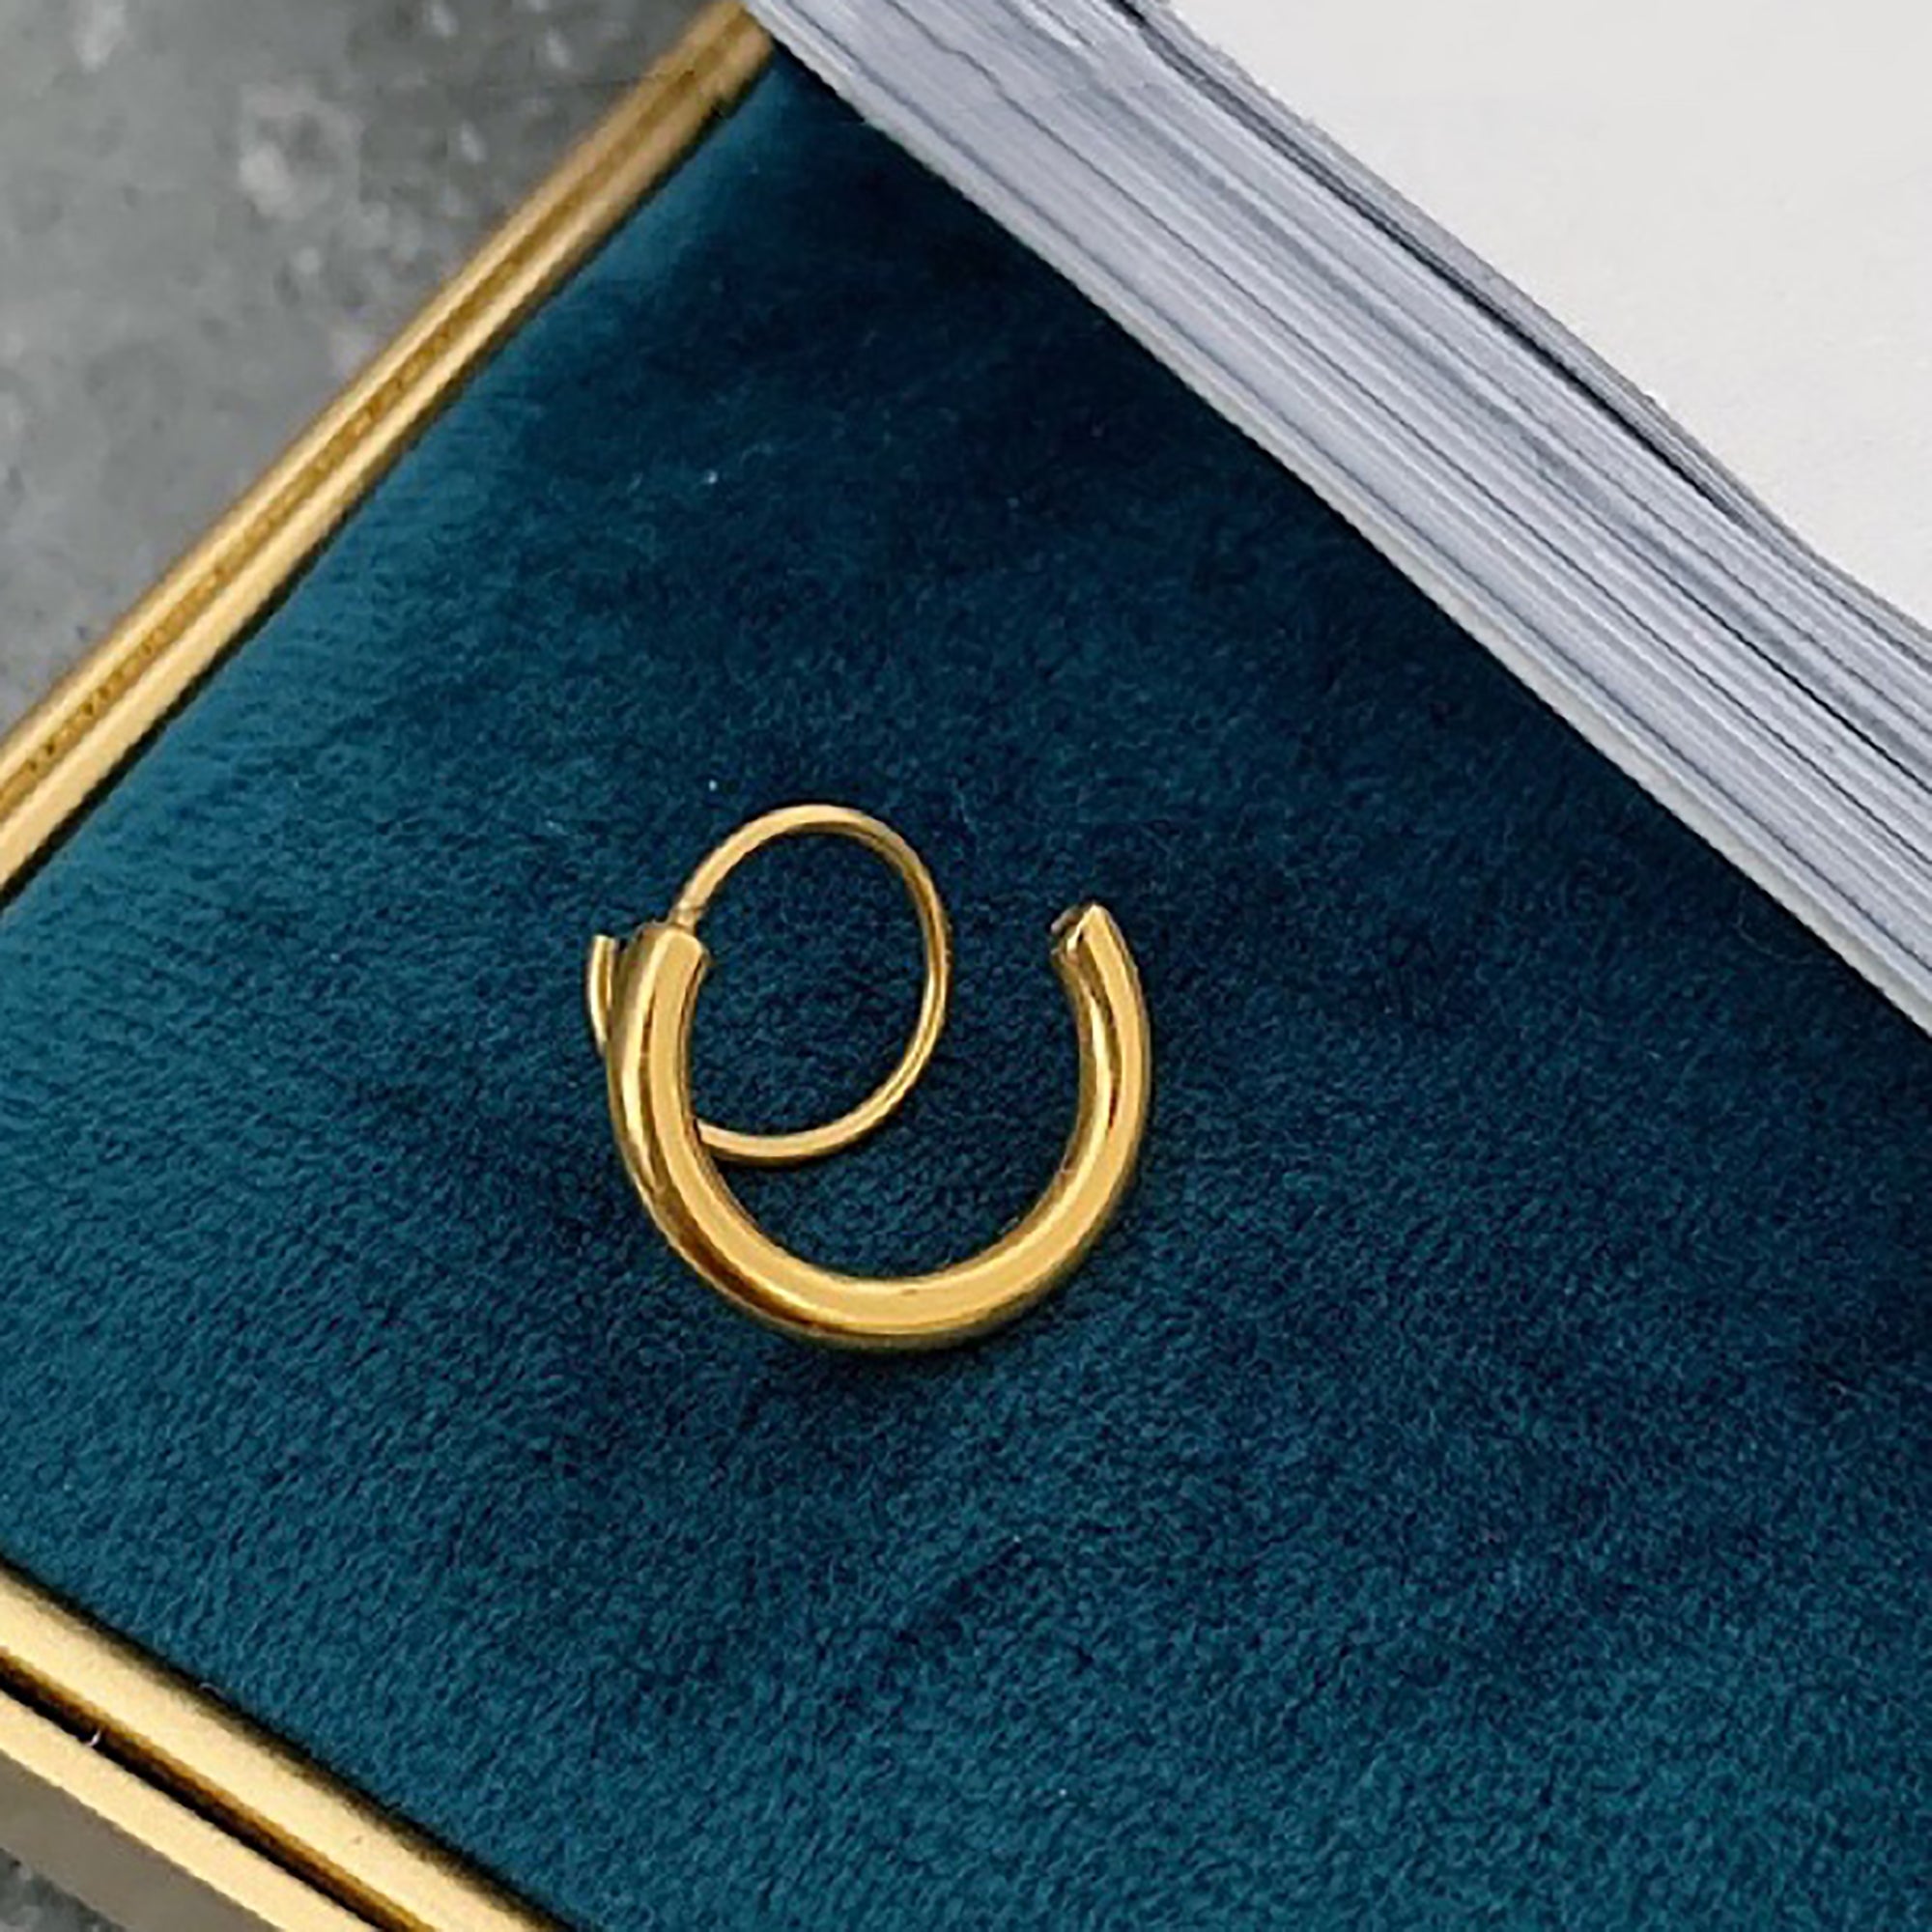 Gold Plated Layered Hoop Earrings Gift wedding influencer styling KOL / Youtuber / Celebrity / Fashion Icon